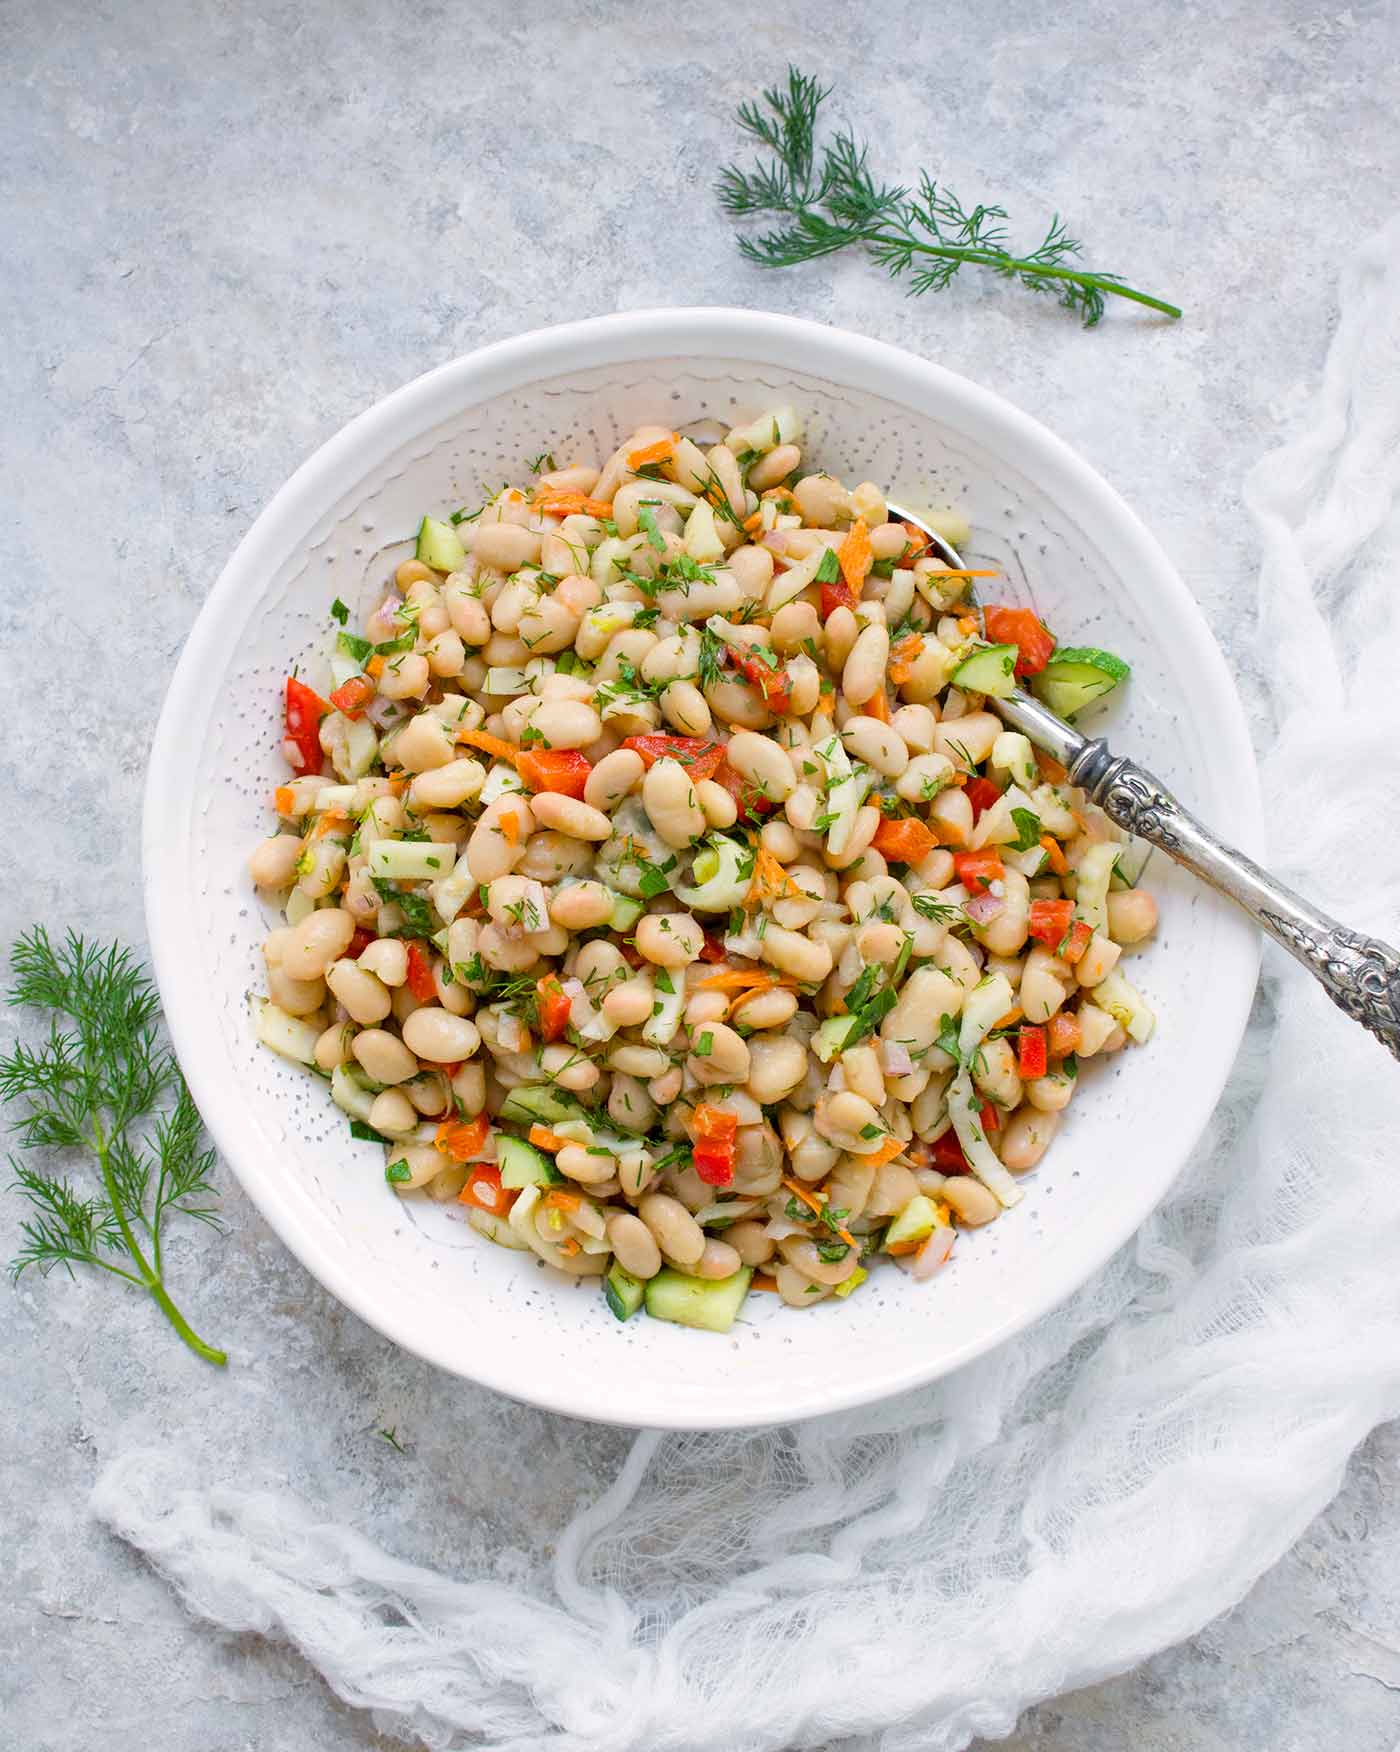 Herbed white bean picnic salad in a large white serving bowl